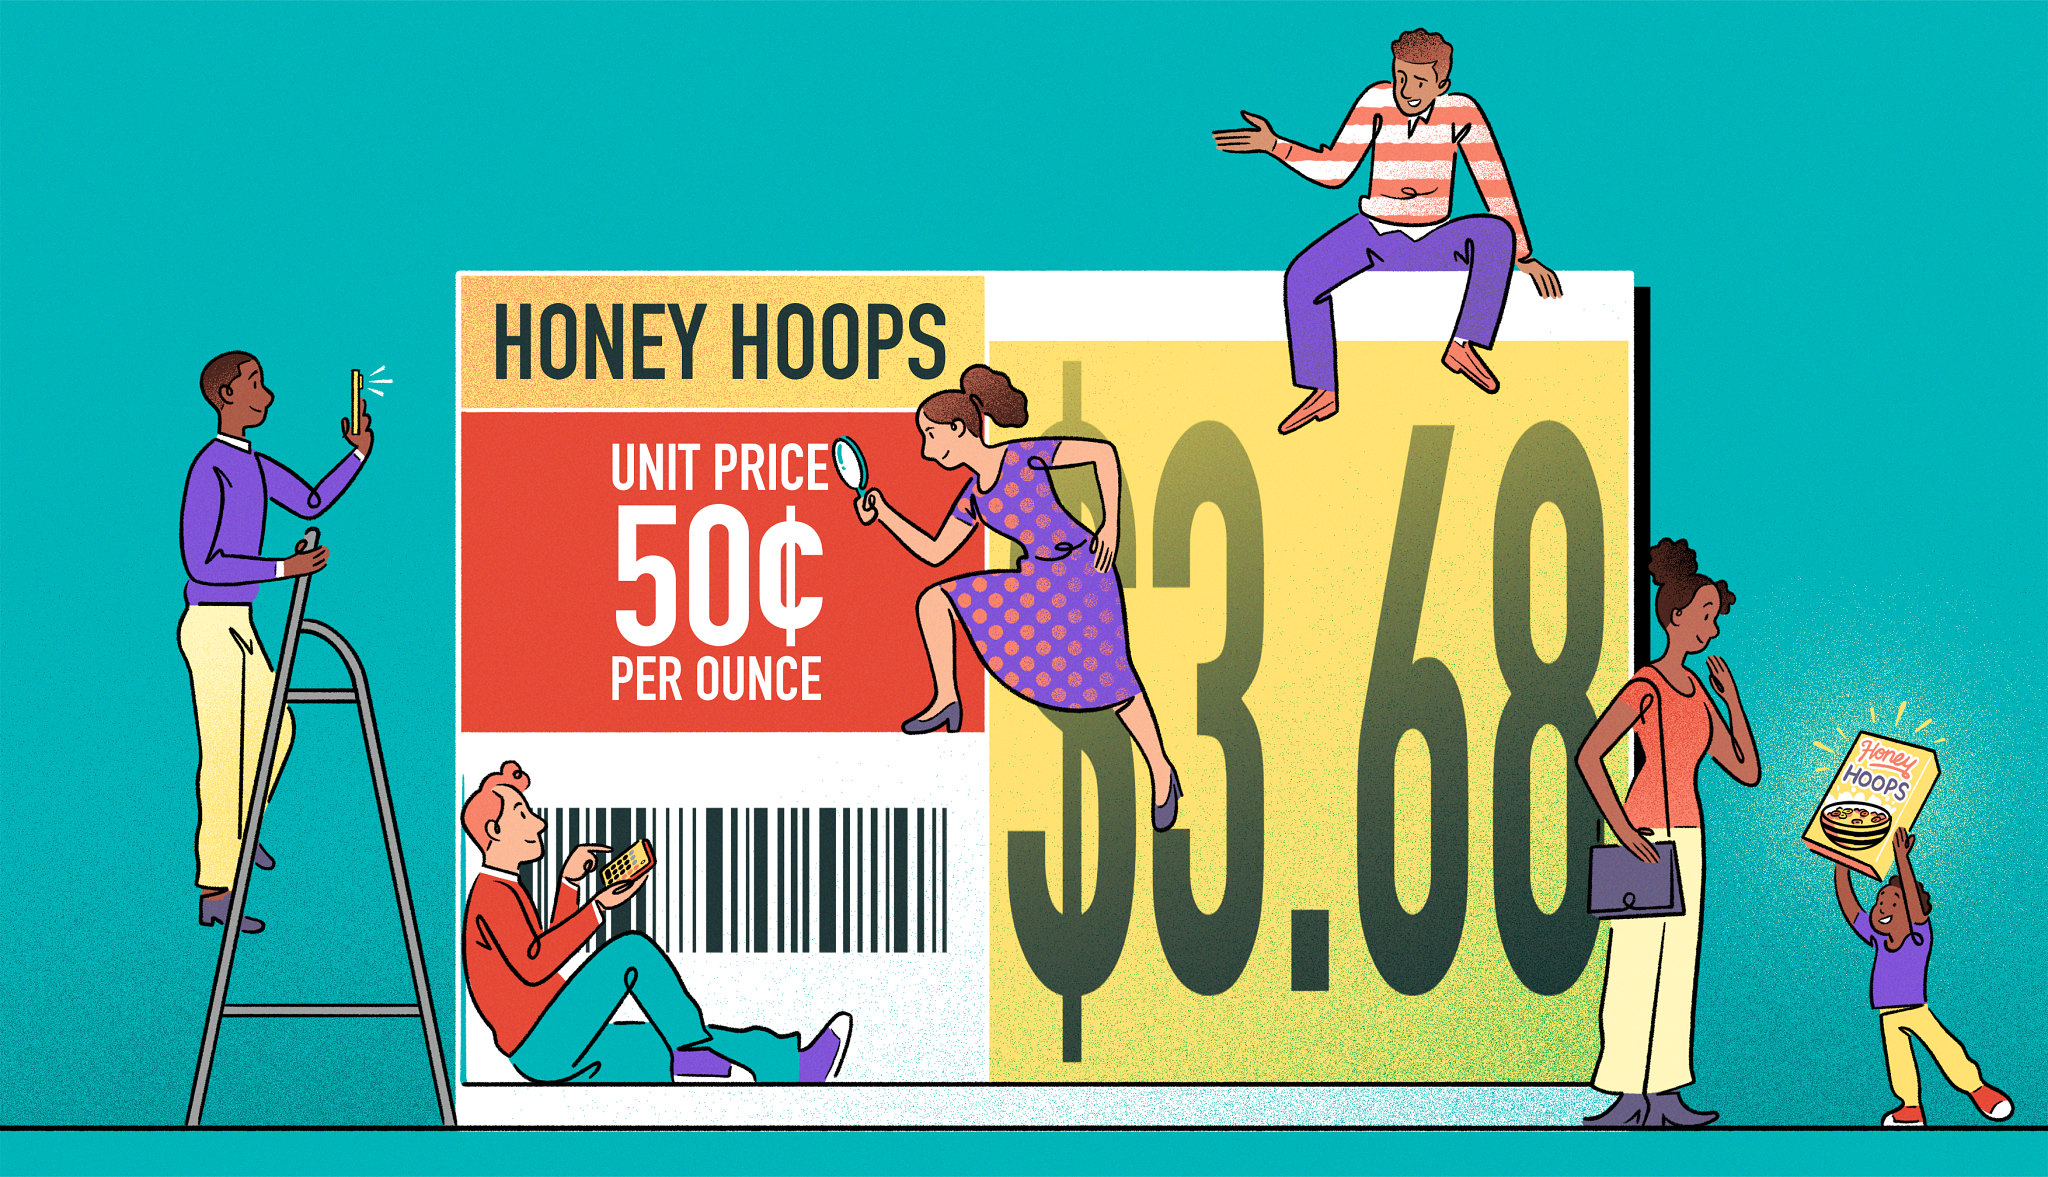 shopppers examine a label to take advantage of unit pricing